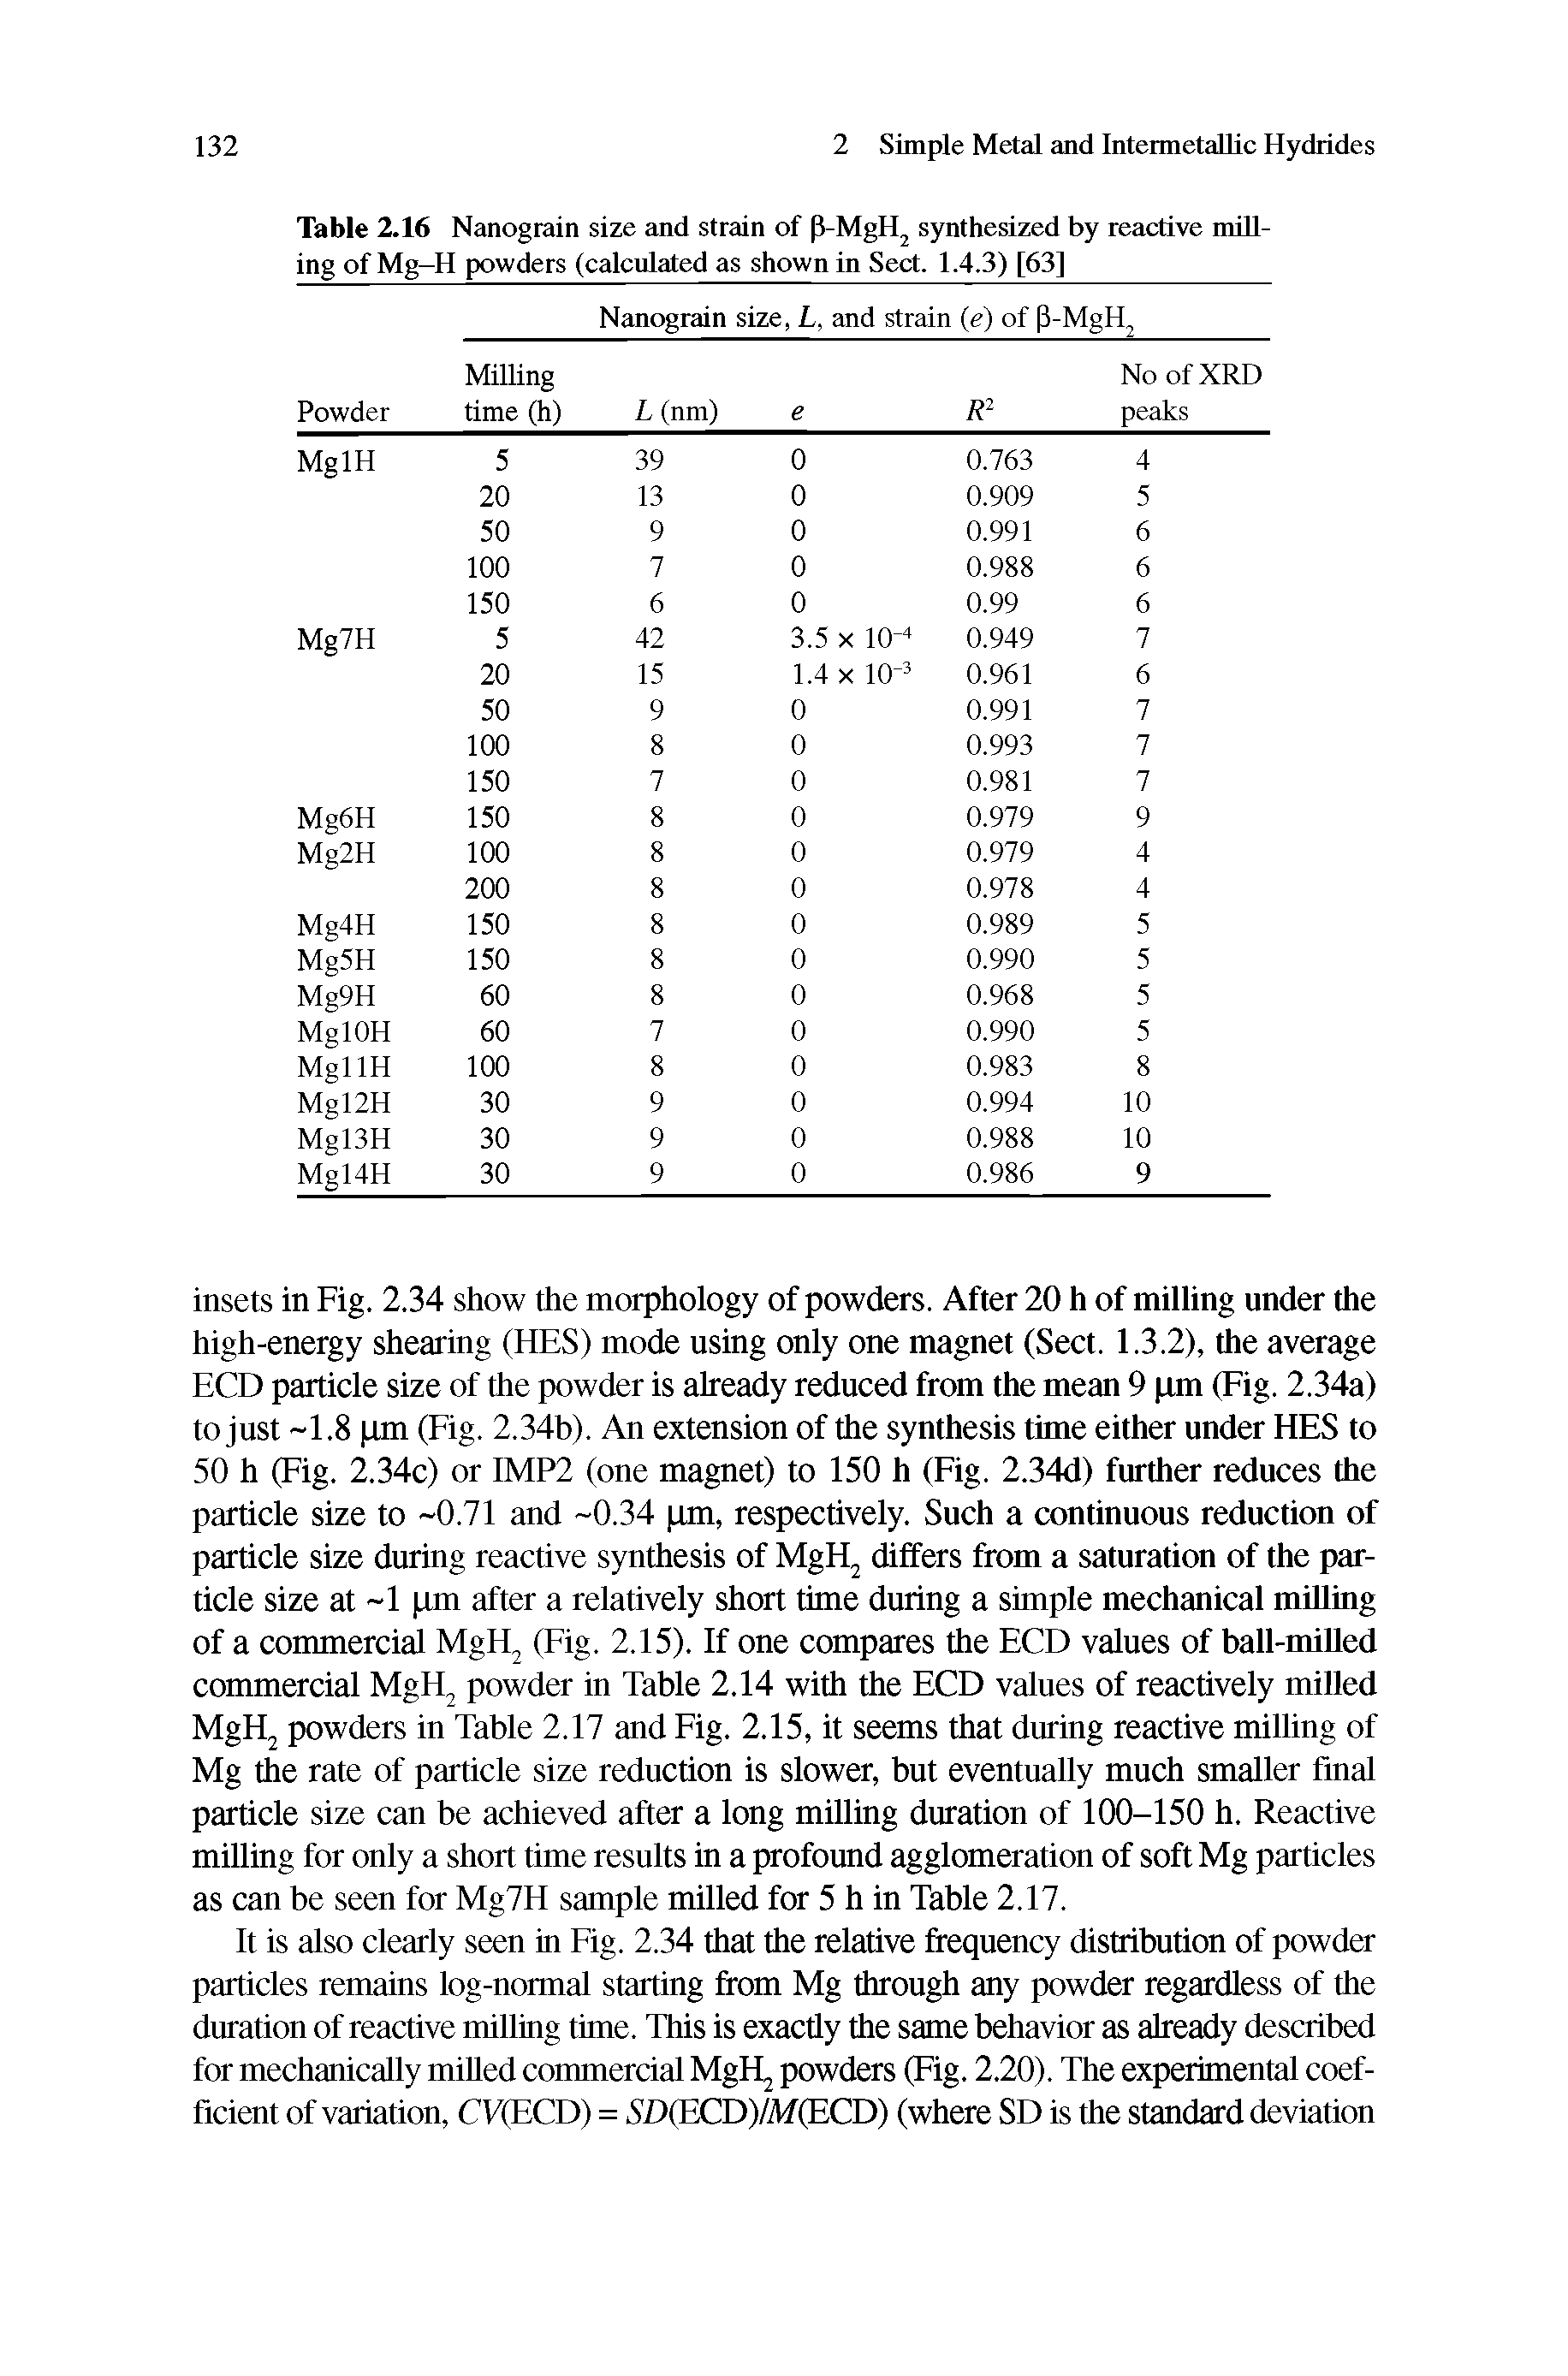 Table 2.16 Nanograin size and strain of [VMgl I2 synthesized by reactive milling of Mg-H powders (calculated as shown in Sect. 1.4.3) [63]...